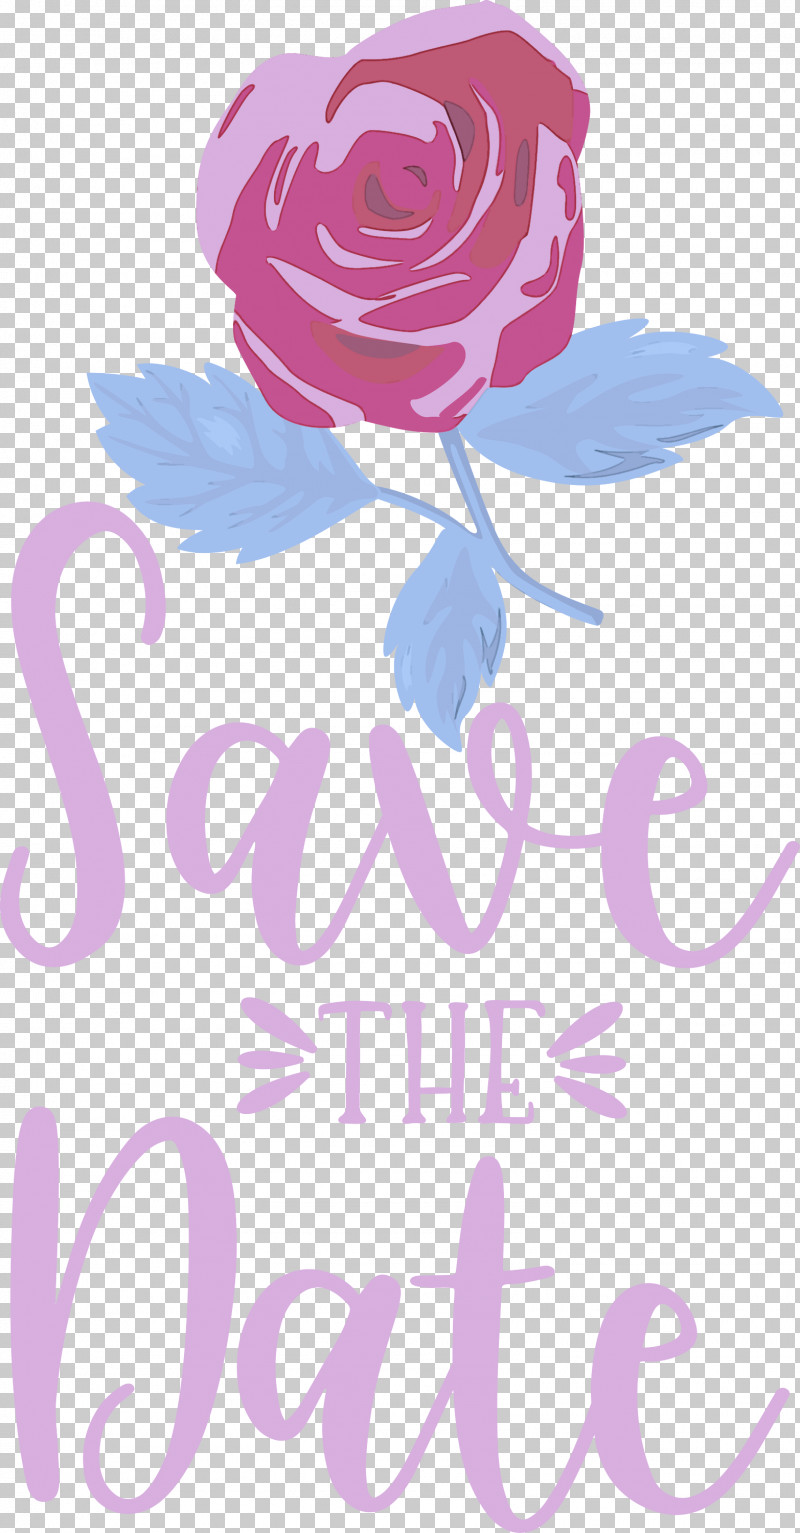 Save The Date Wedding PNG, Clipart, Cut Flowers, Floral Design, Flower, Lavender, Logo Free PNG Download